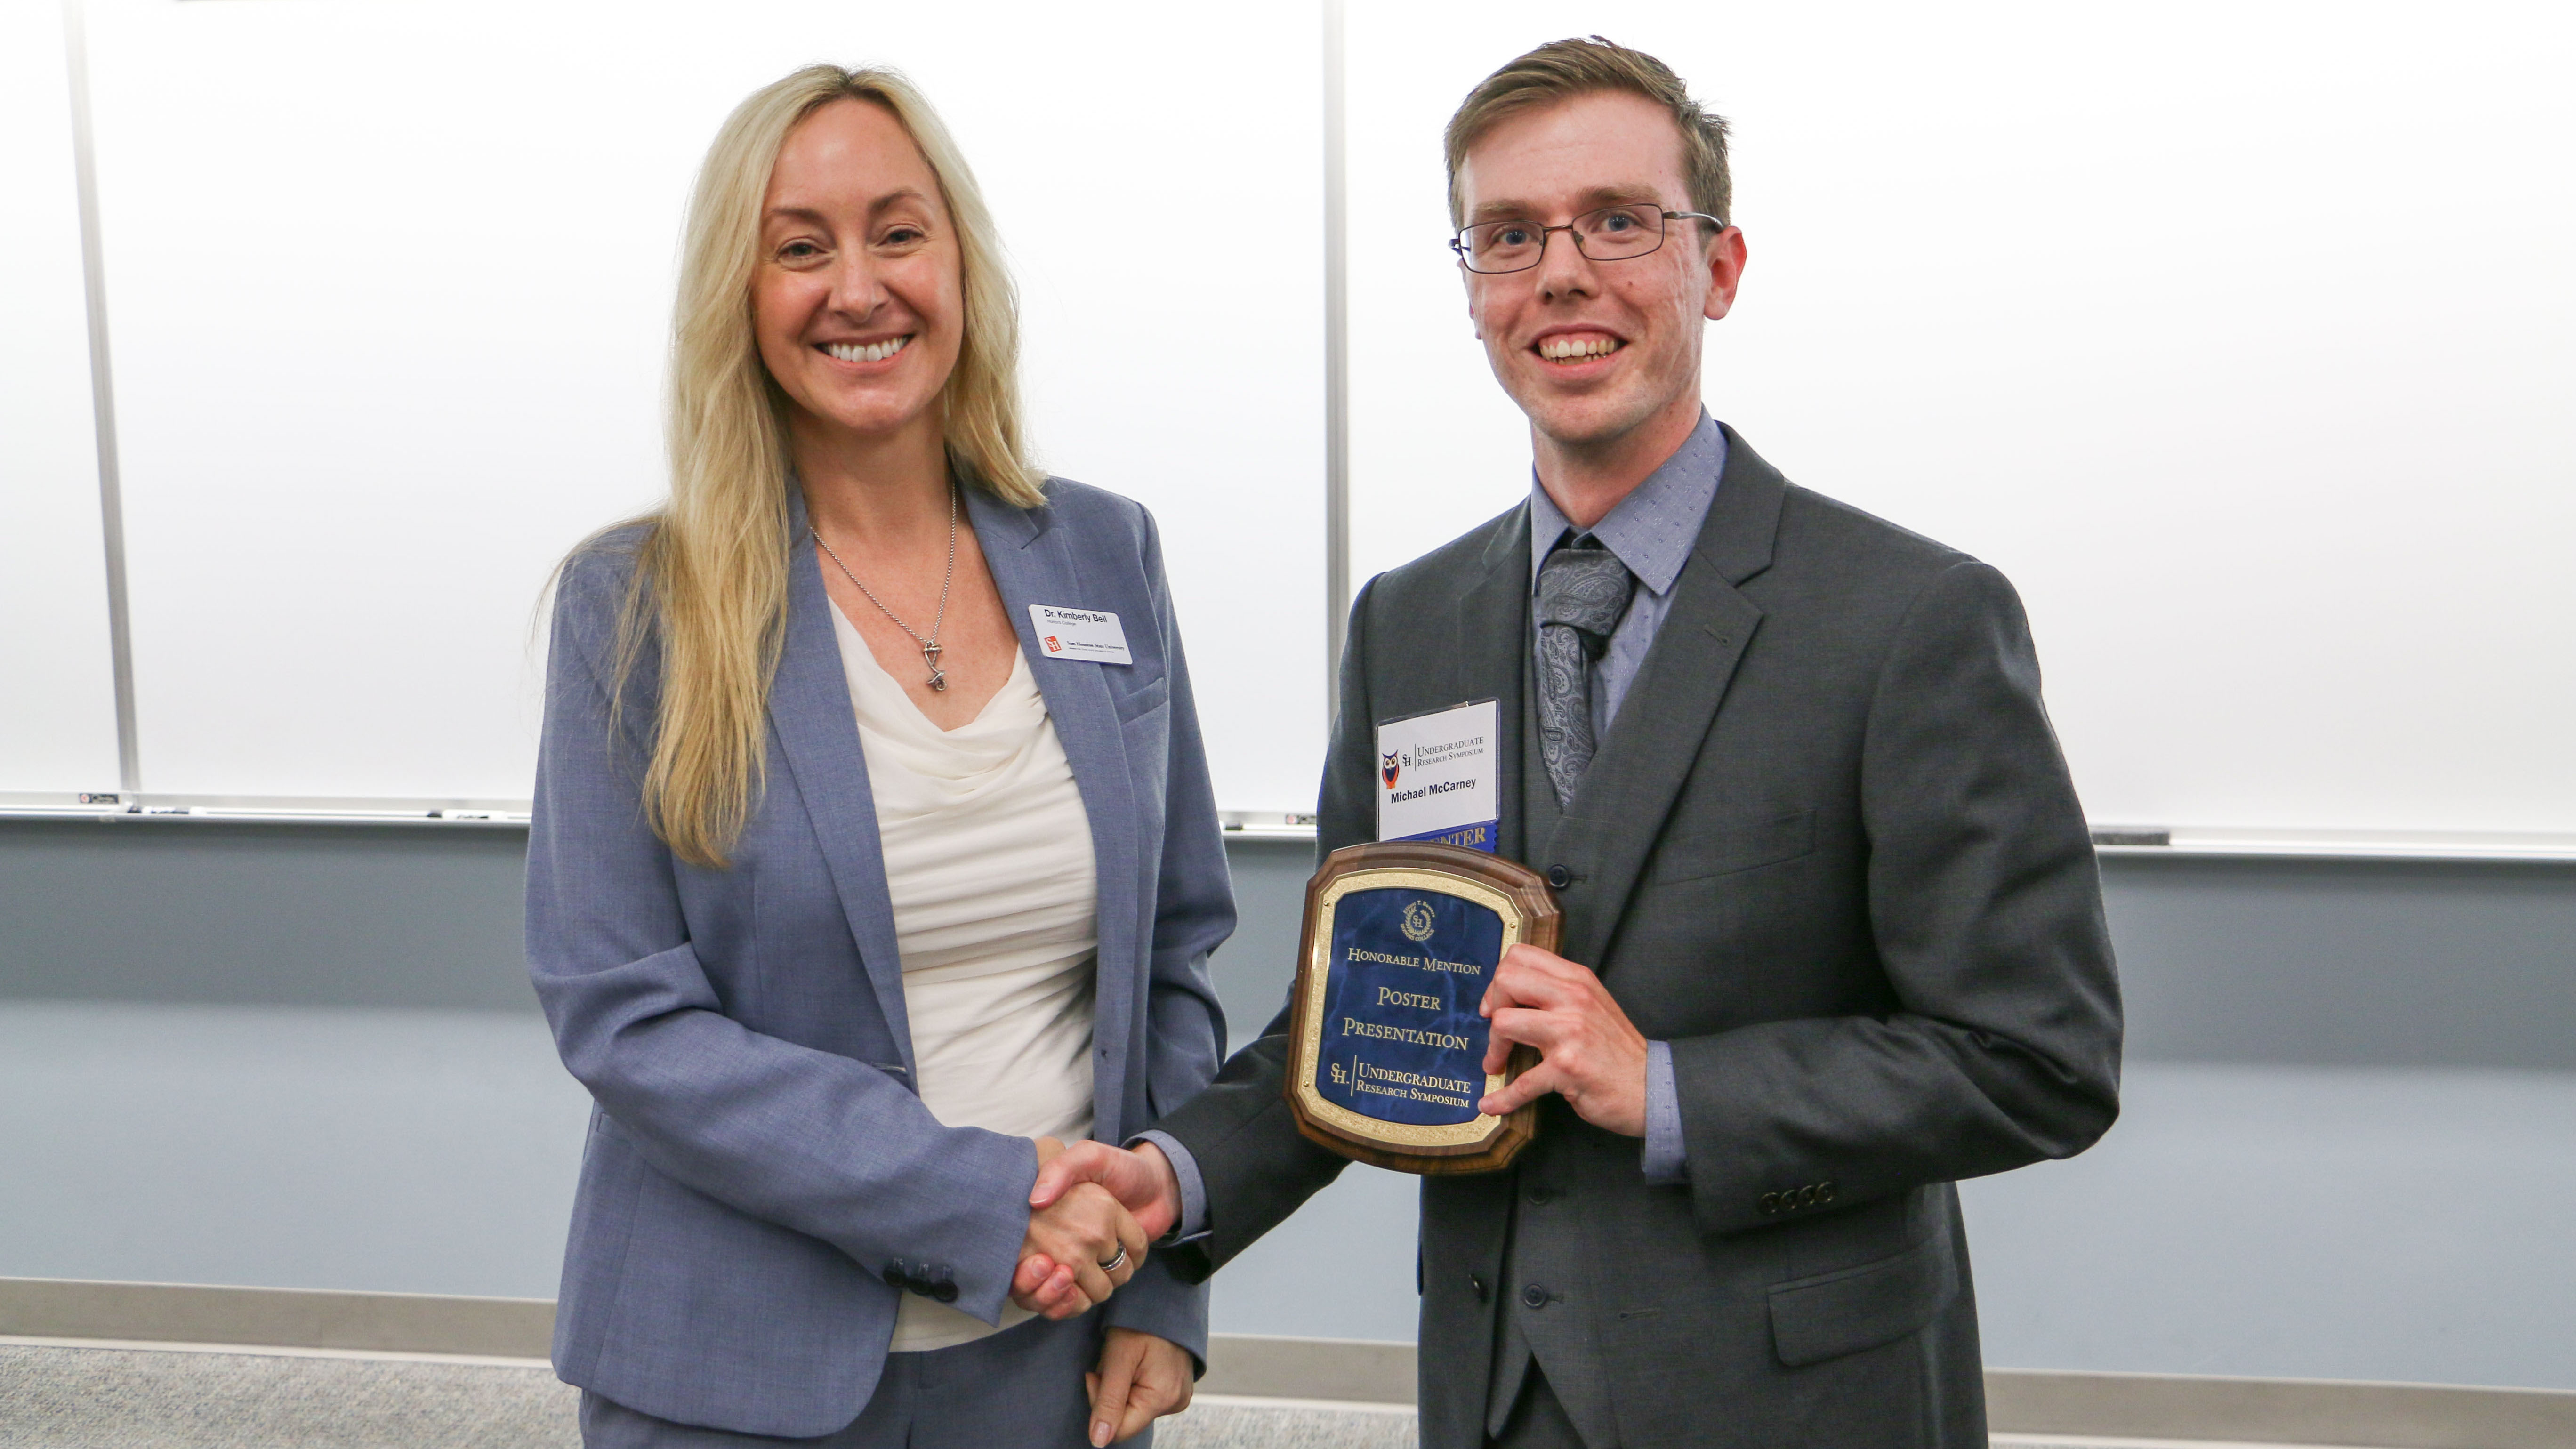 Dr. Kimberly Bell with Honorable Mention Recipient, Michael McCarney